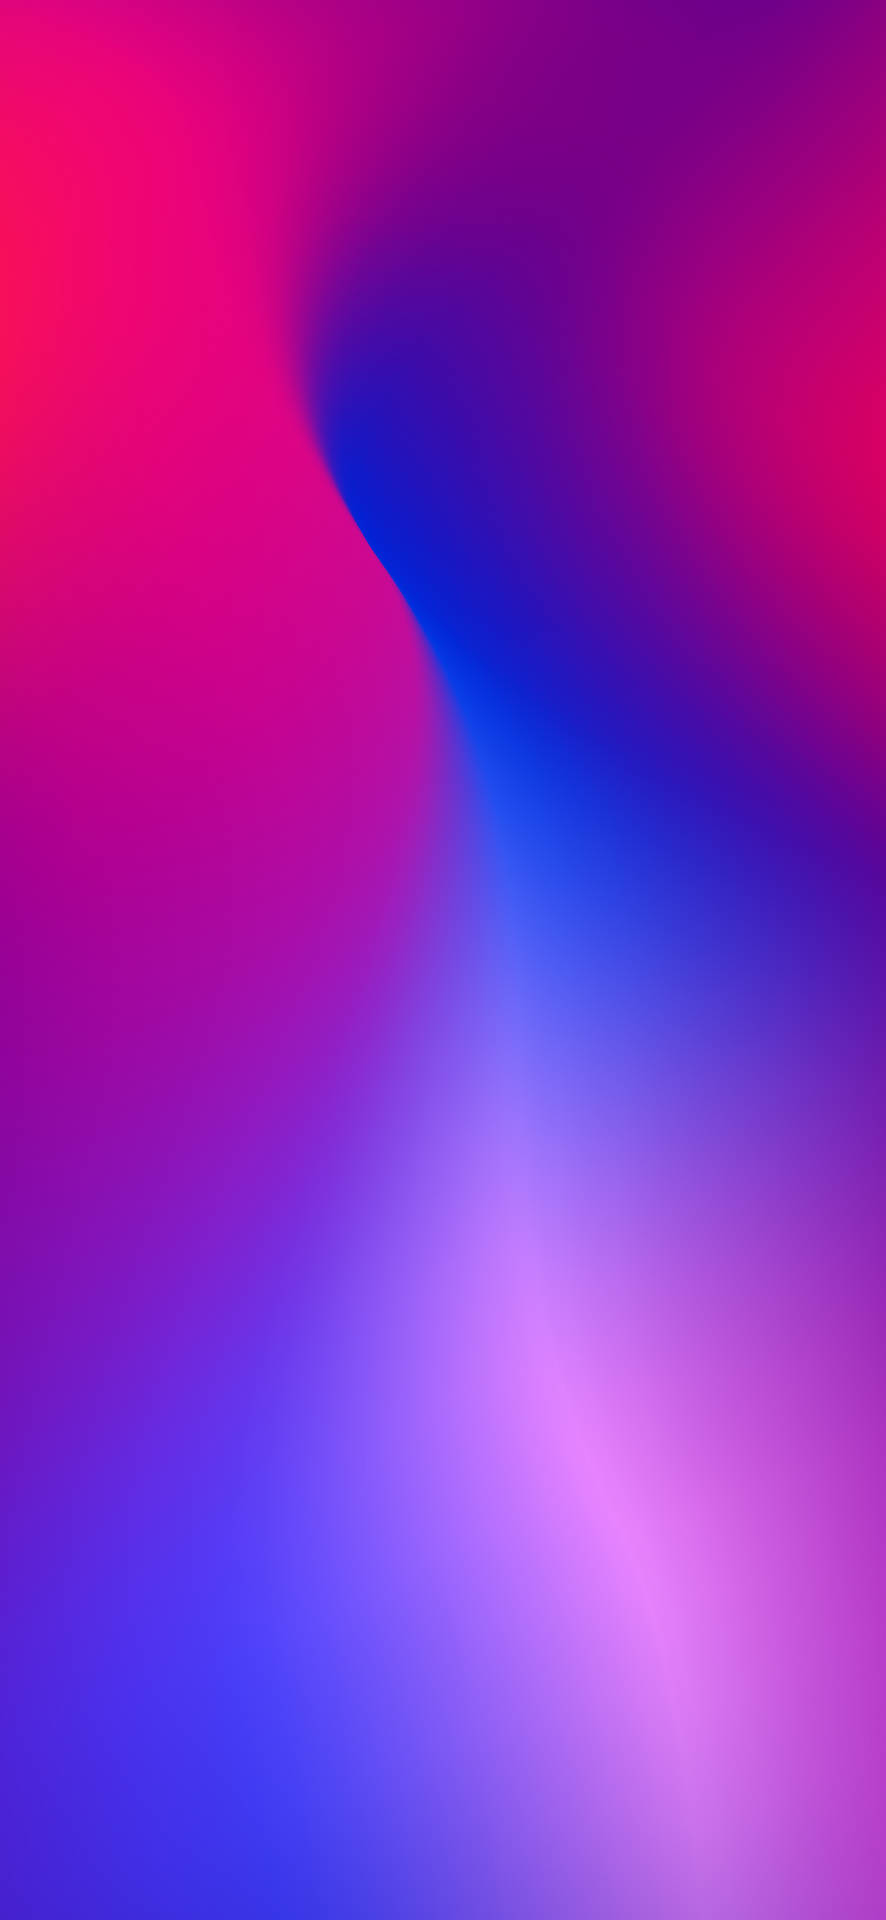 Elegant Oppo A5s Smartphone Displaying Pink-Blue Gradient Screen Wallpaper